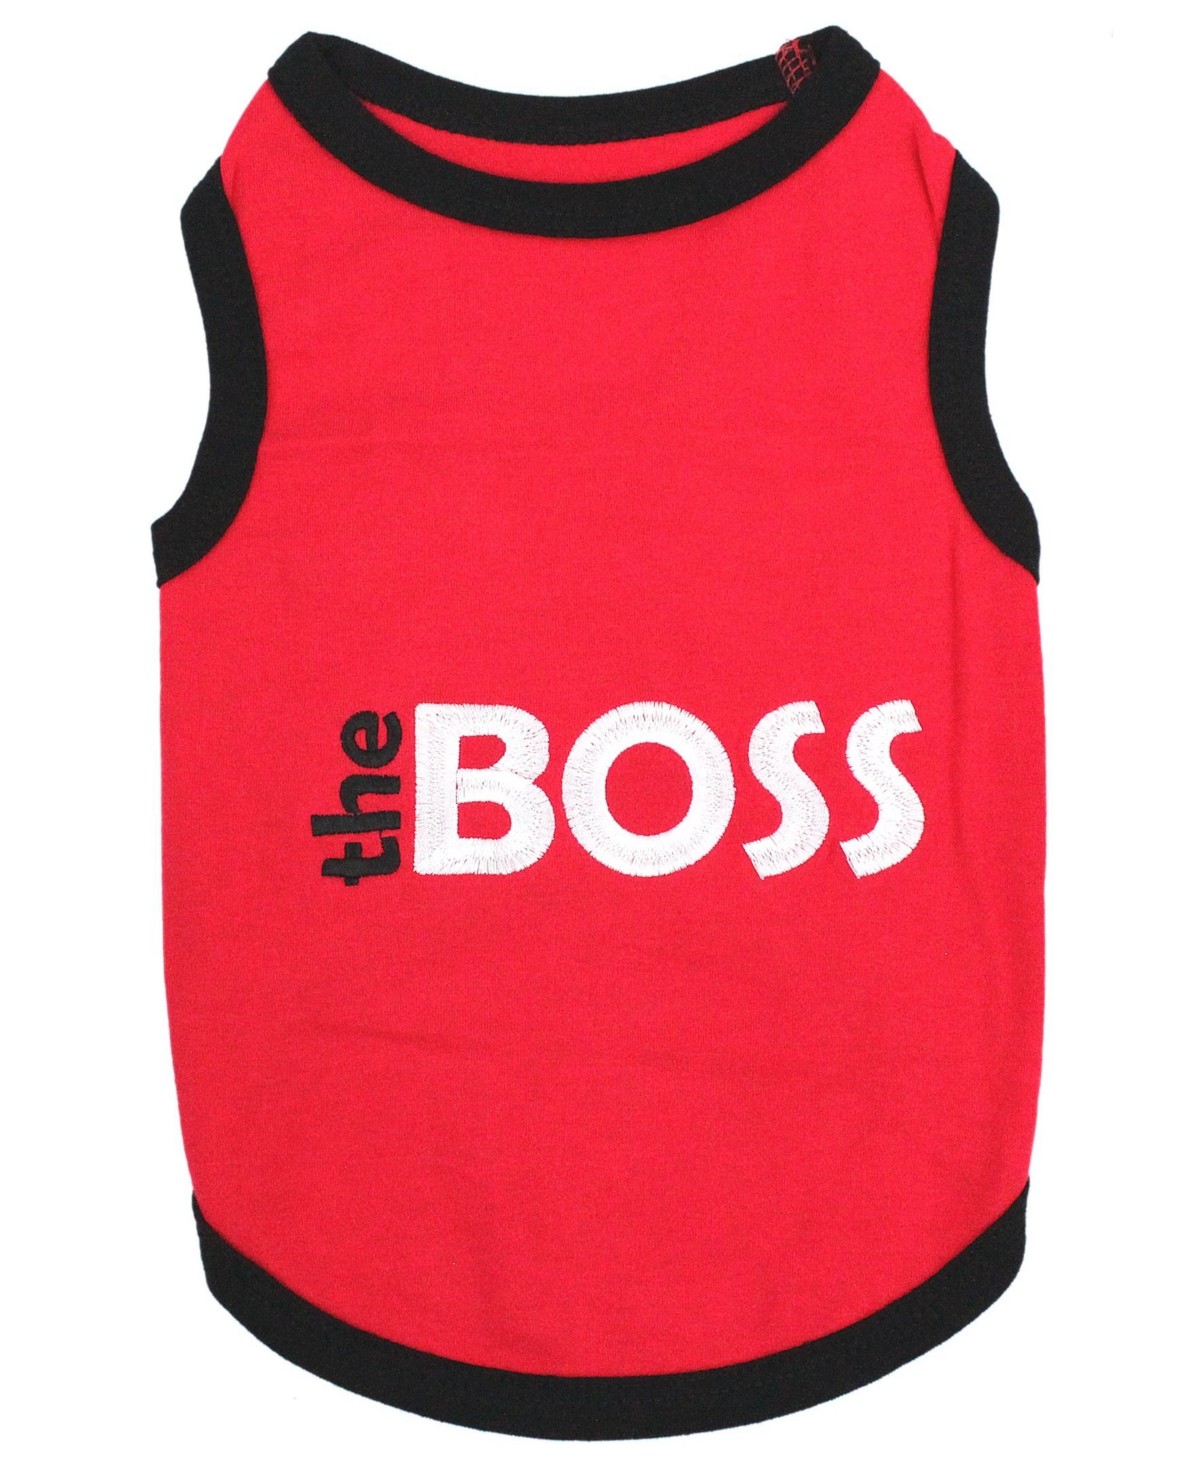 The Boss Dog T-Shirt - Red